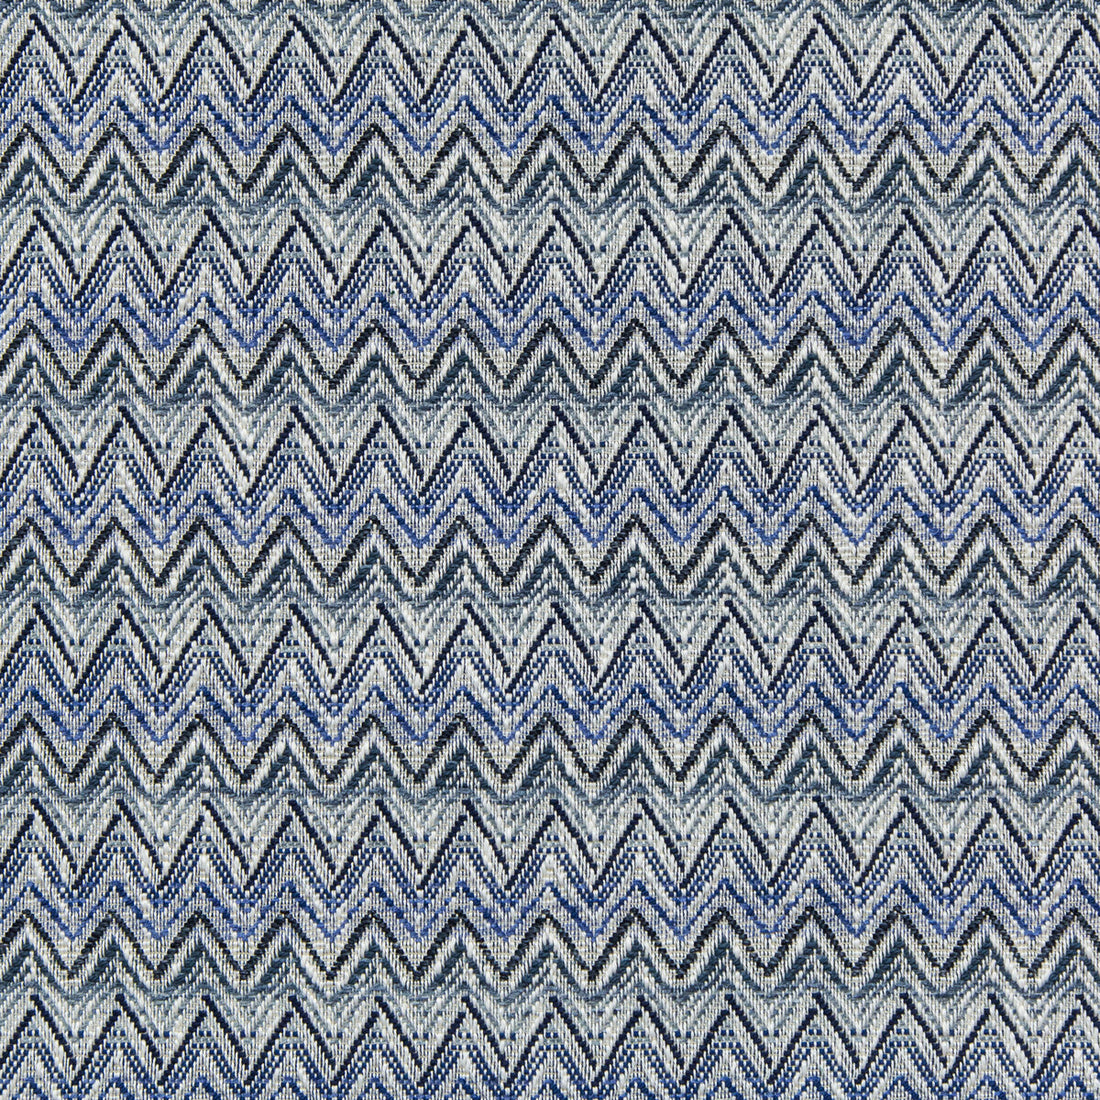 Cambrose Weave fabric in denim color - pattern 2020107.505.0 - by Lee Jofa in the Linford Weaves collection